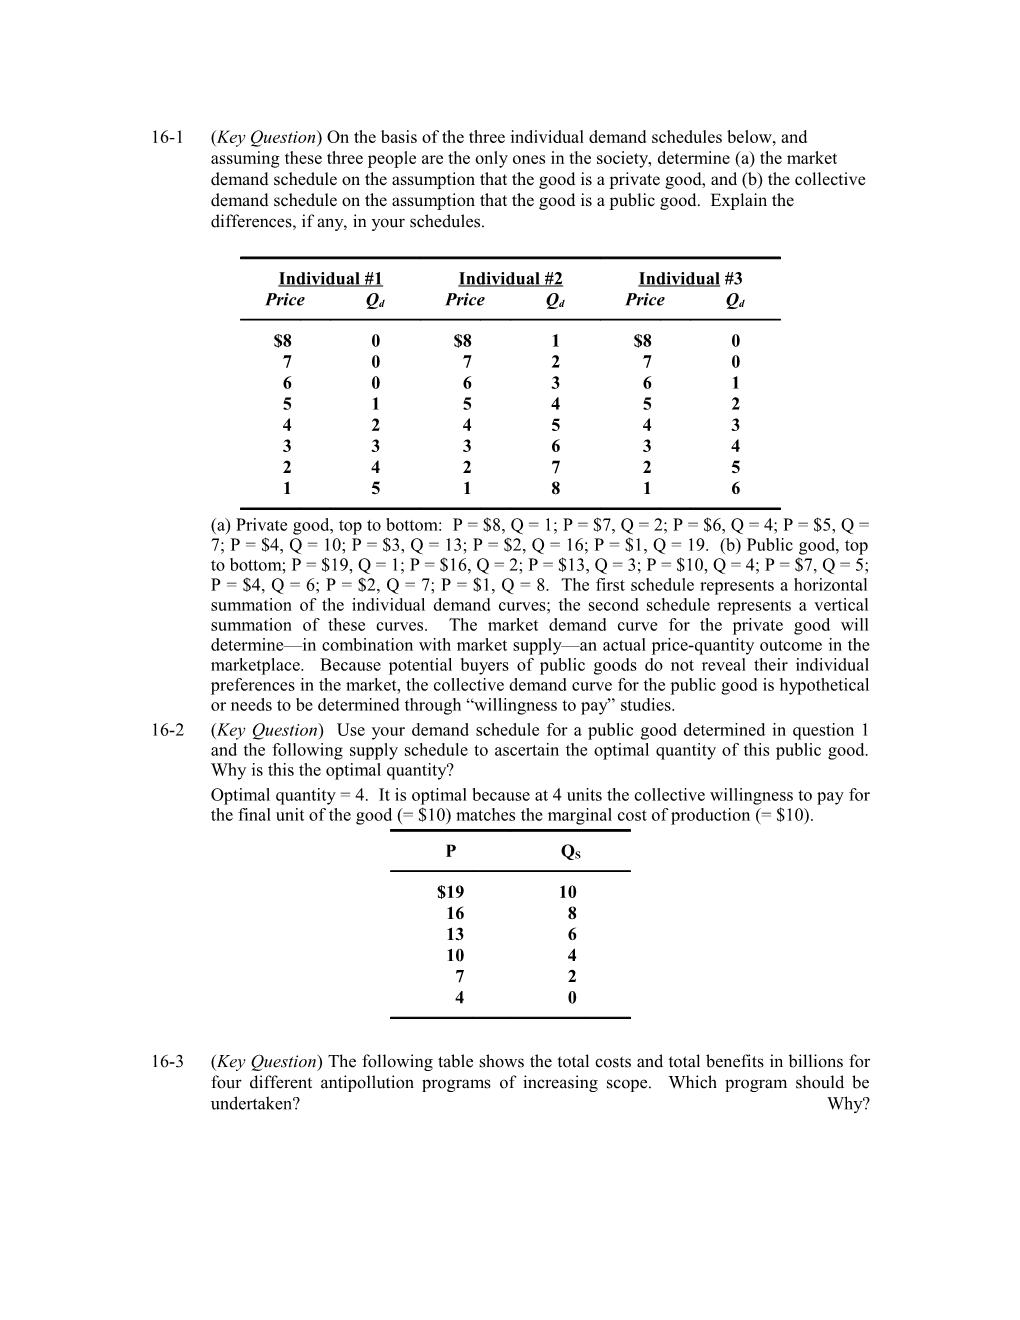 161(Key Question) on the Basis of the Three Individual Demand Schedules Below, and Assuming